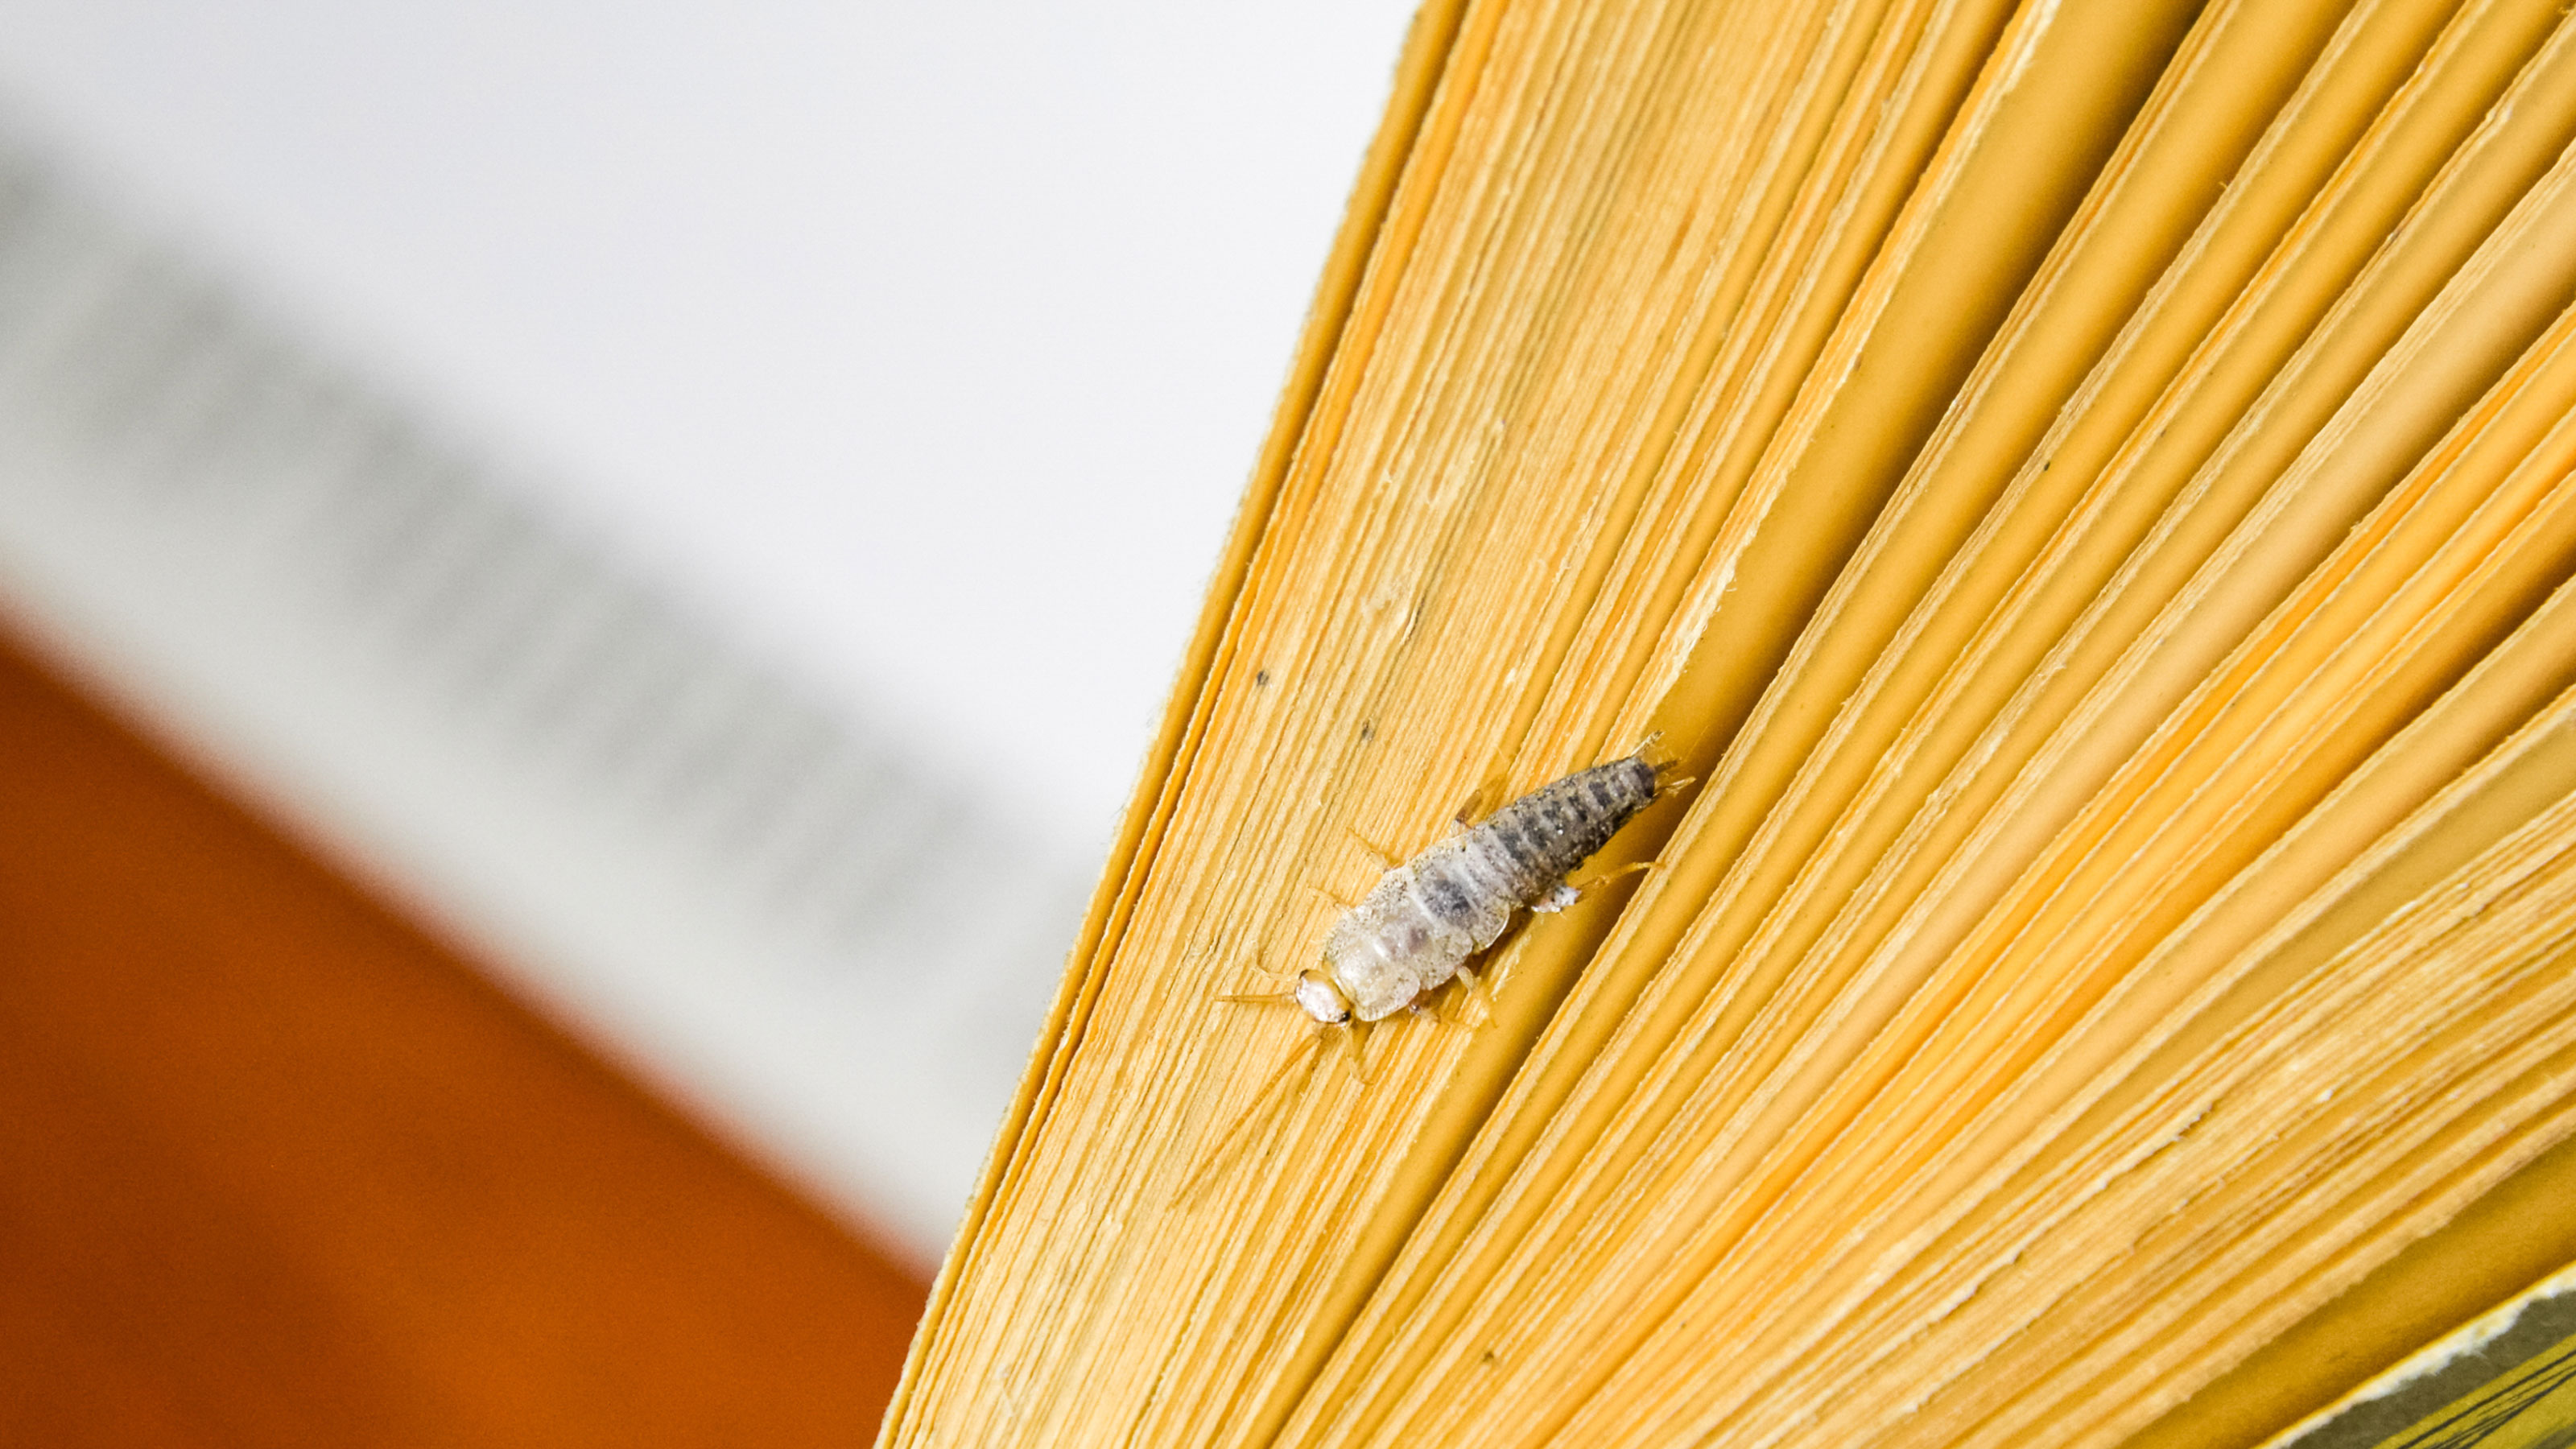 How to get rid of silverfish with home remedies, Mrs Hinch top tips and  more